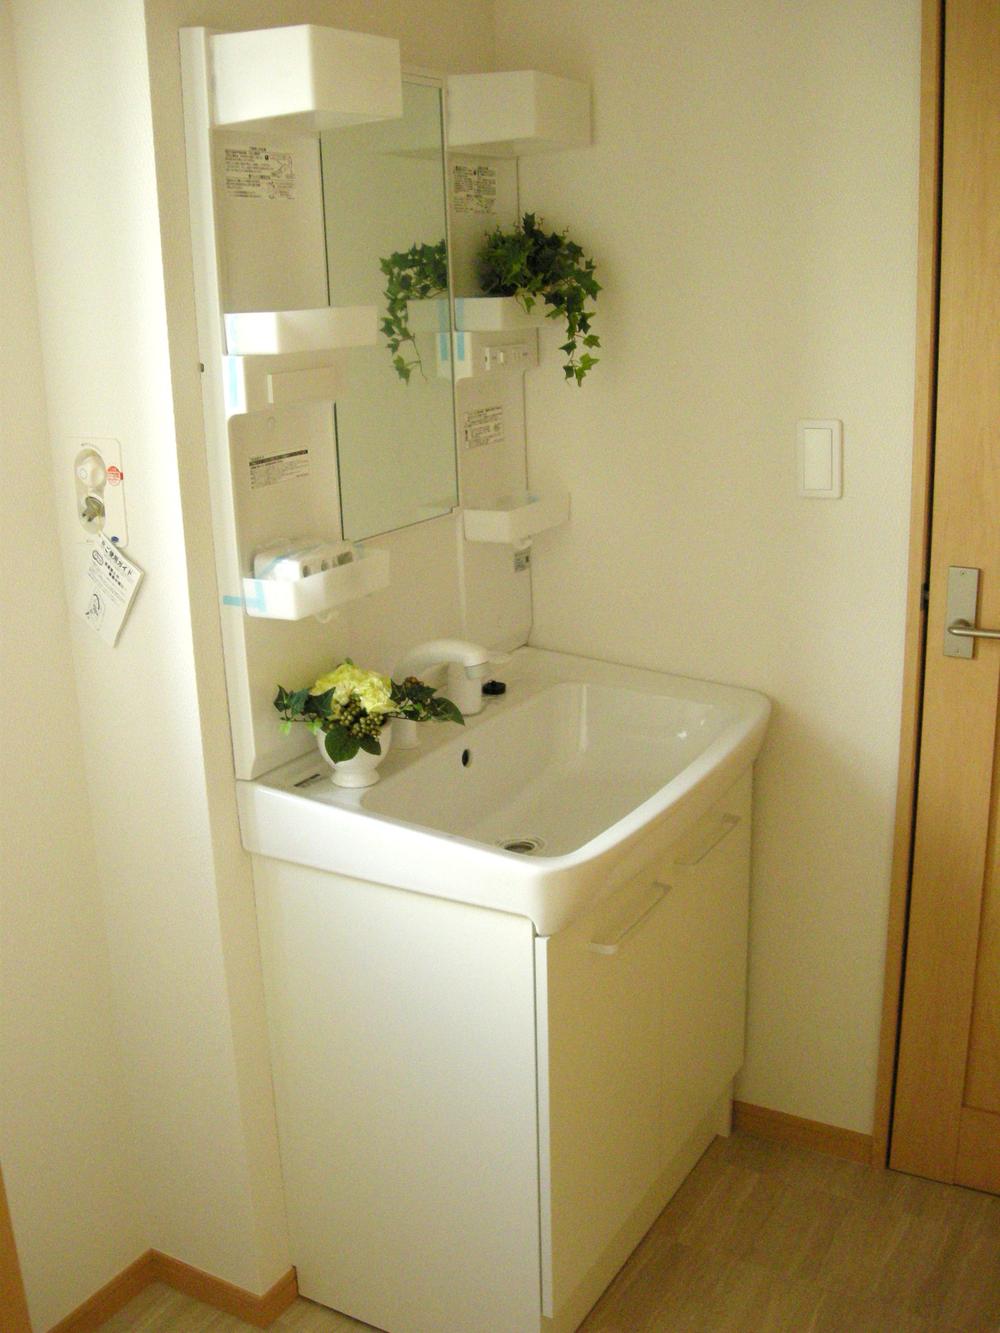 Wash basin, toilet. It is a wash basin with large mirror